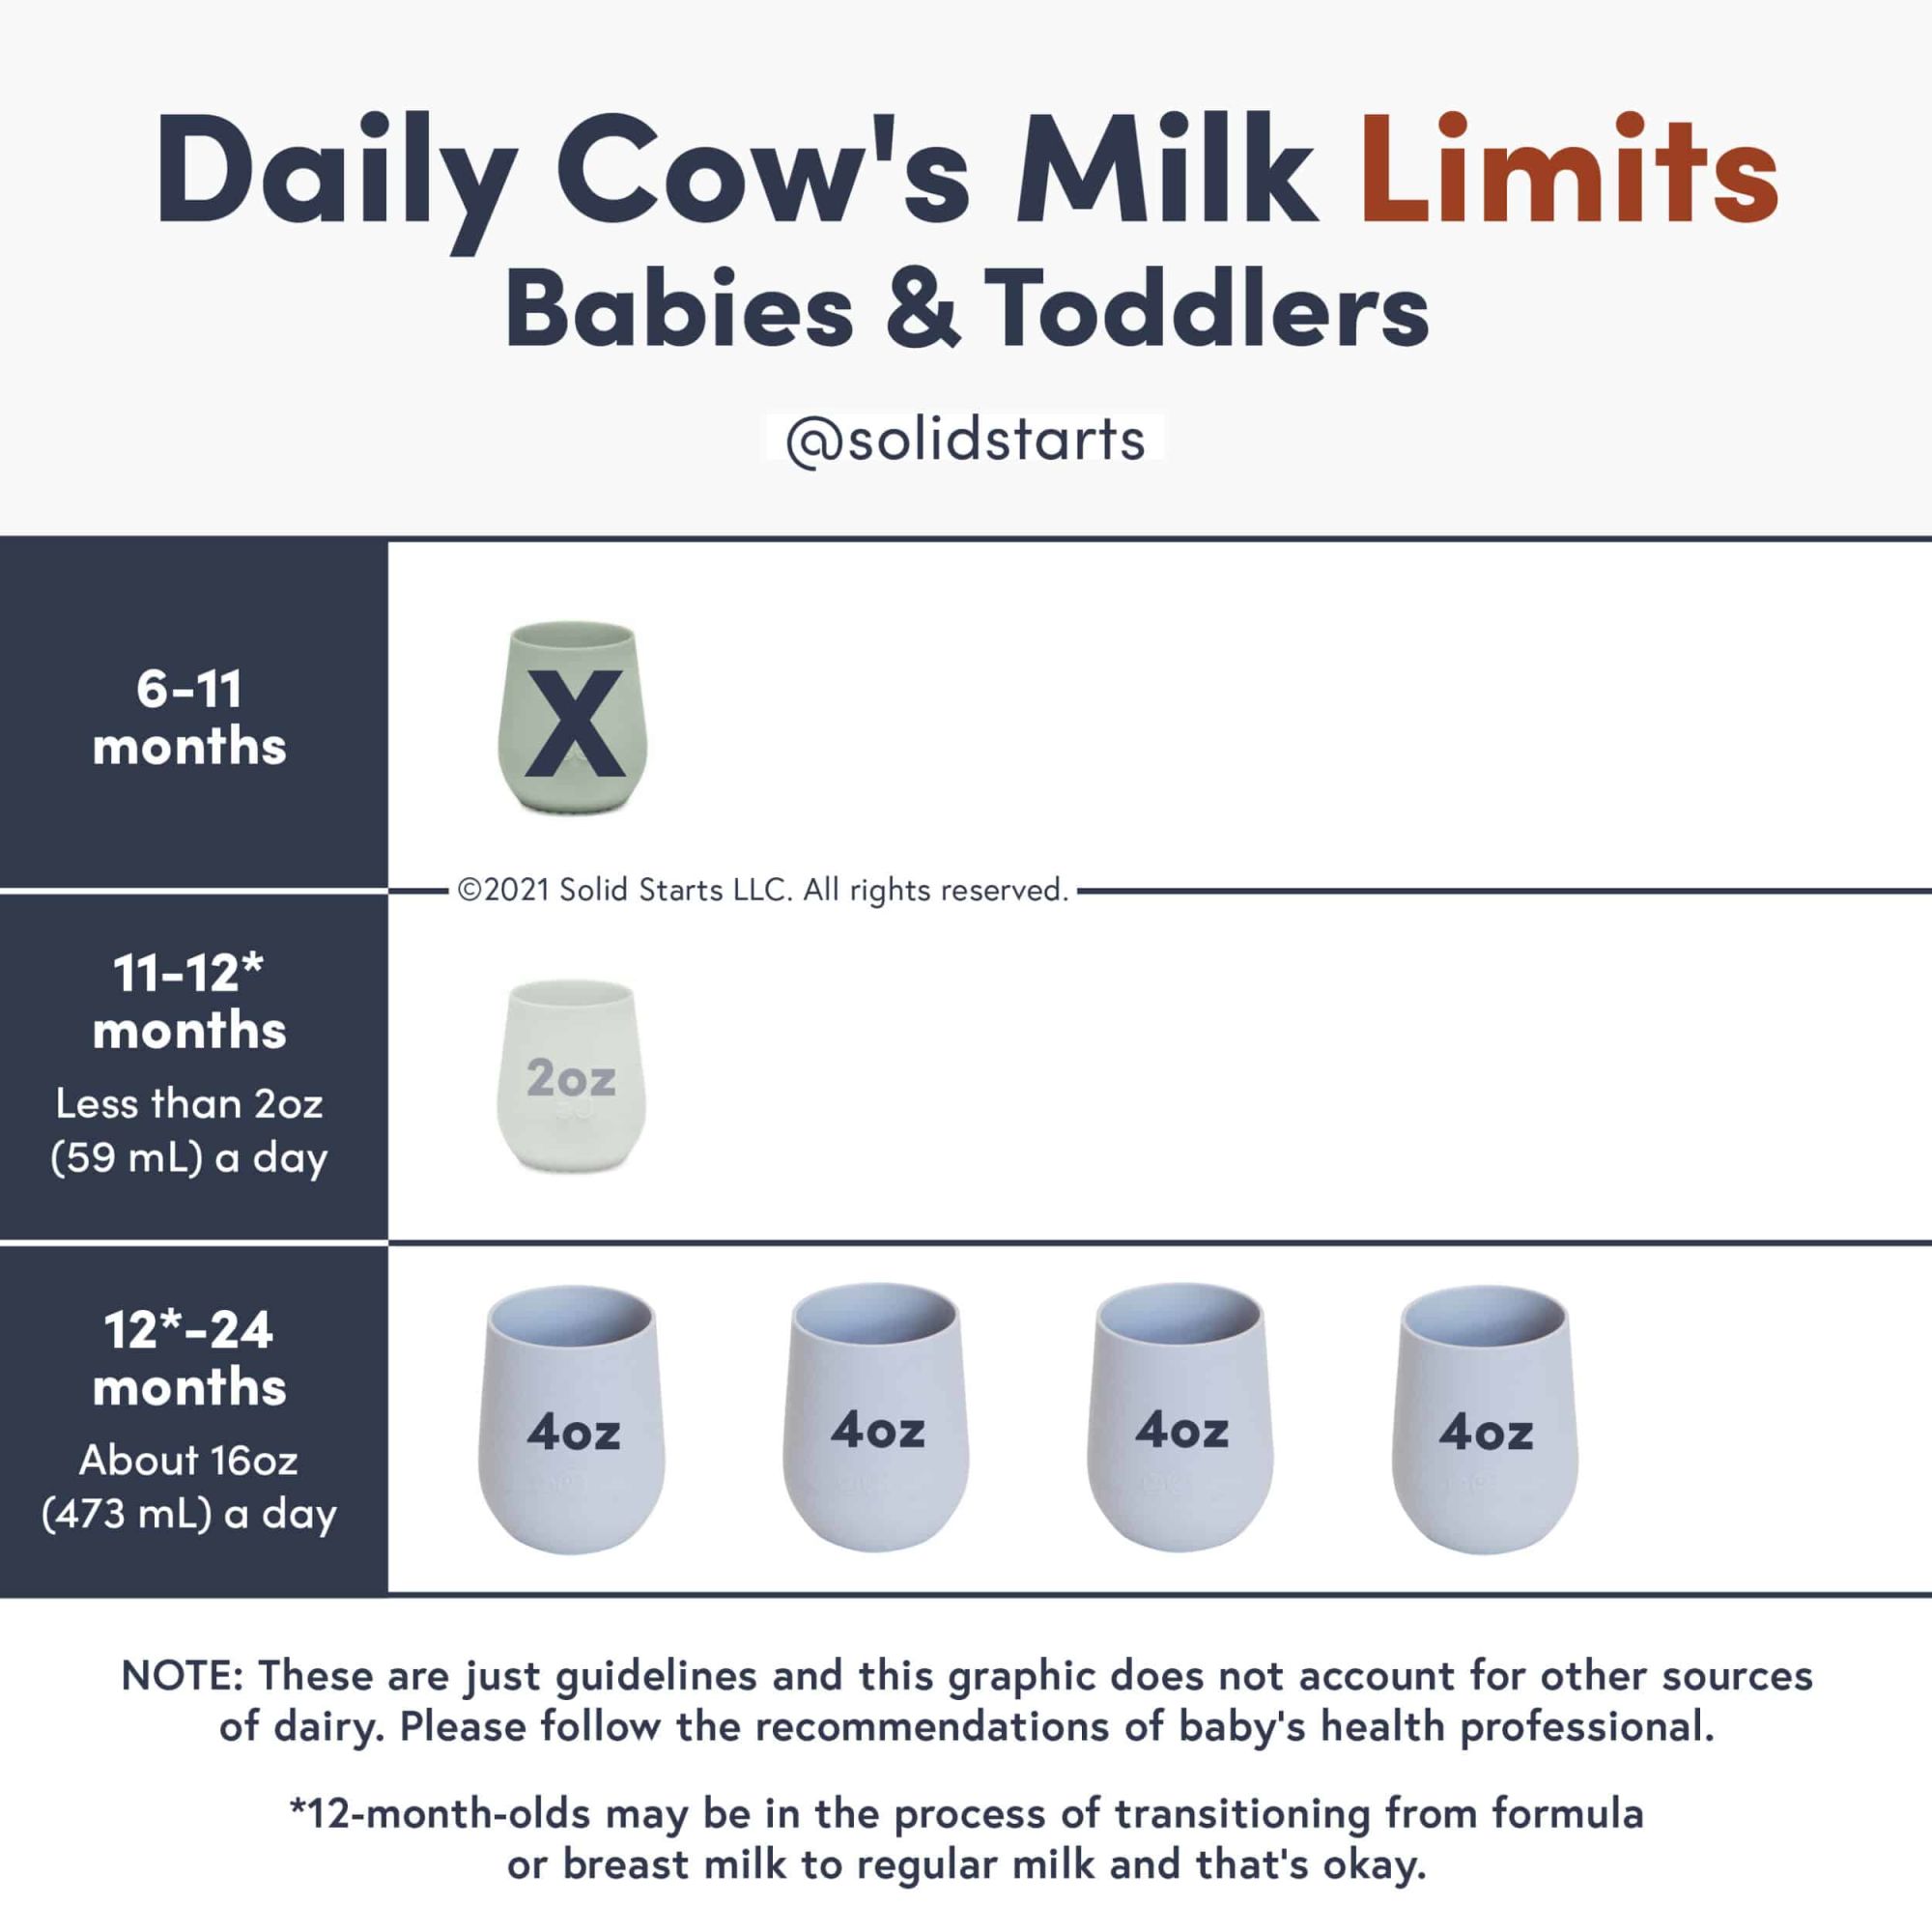 Do Kids Need Milk to Grow Up Strong?